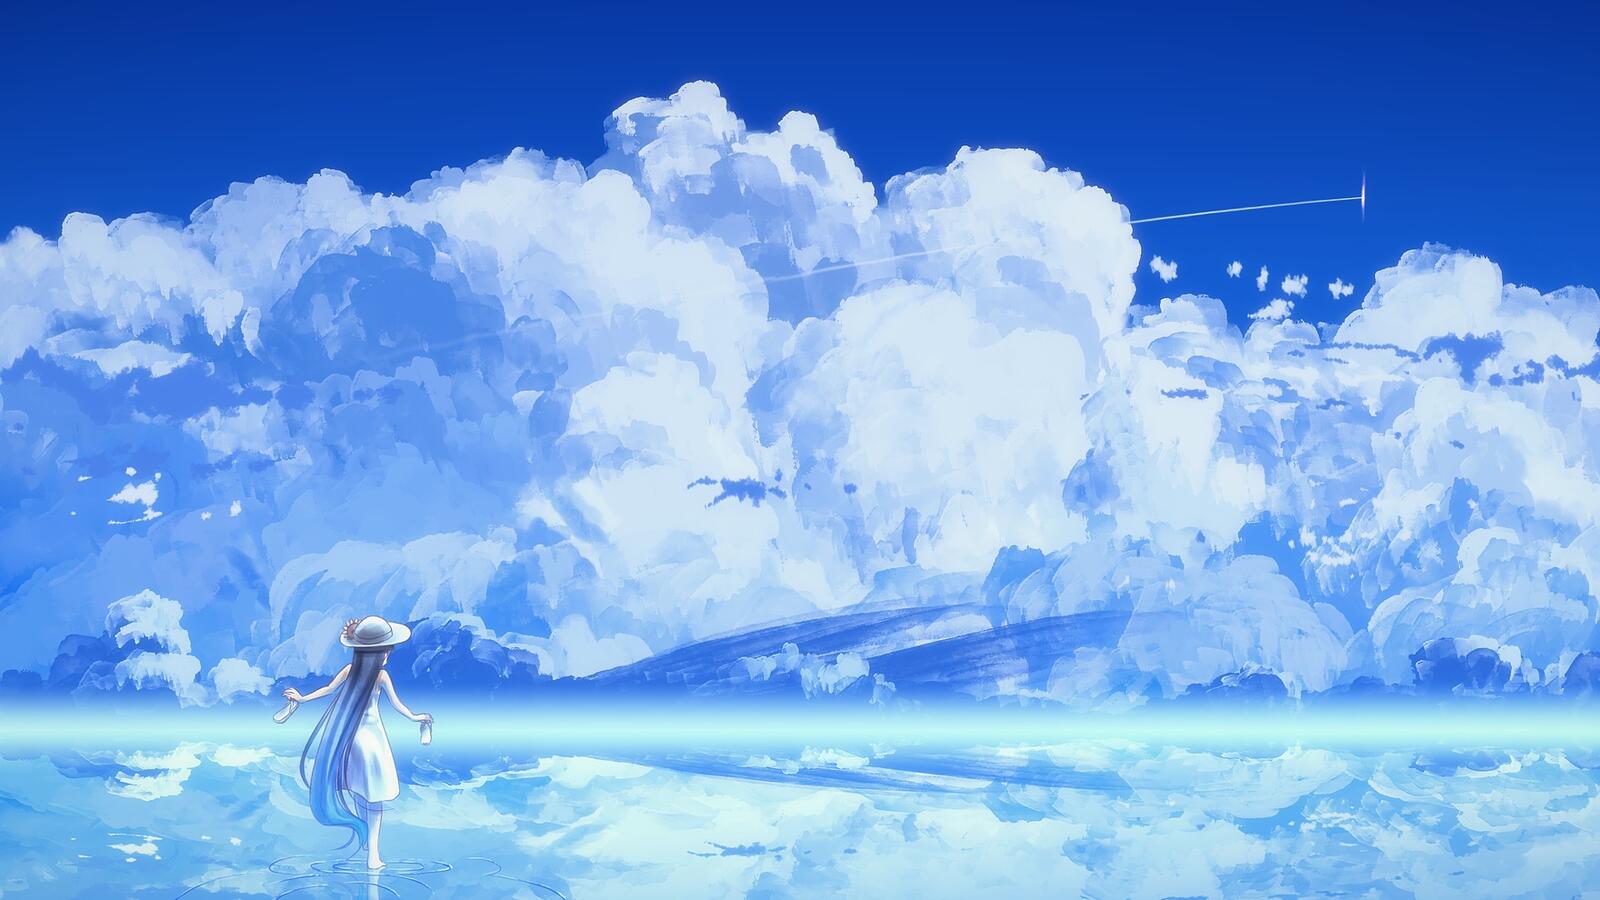 Wallpapers anime girl beyond the clouds white dress on the desktop